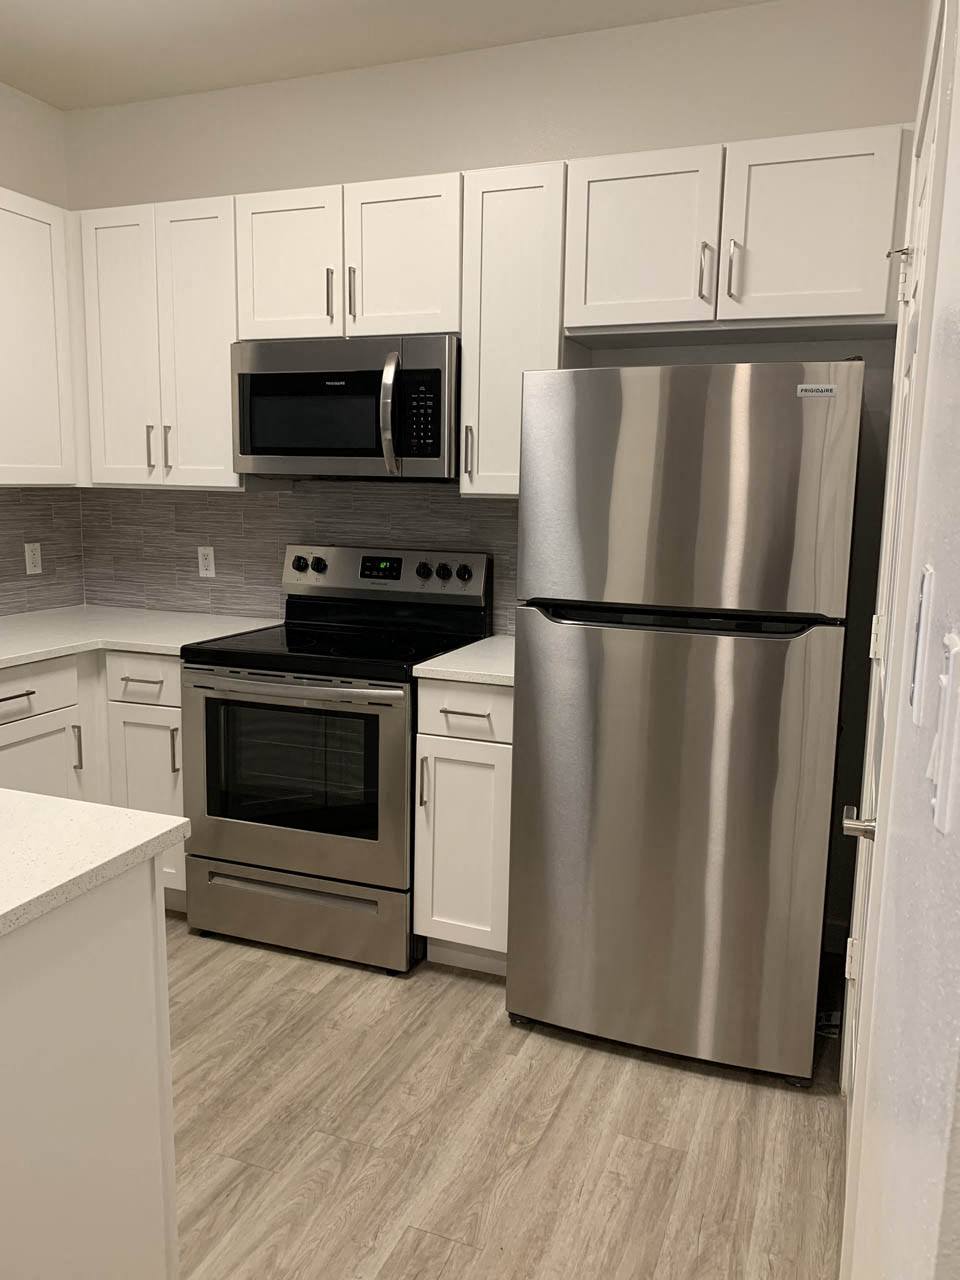 Fully Equipped Kitchen at Mainstreet Apartments, Clearwater, FL